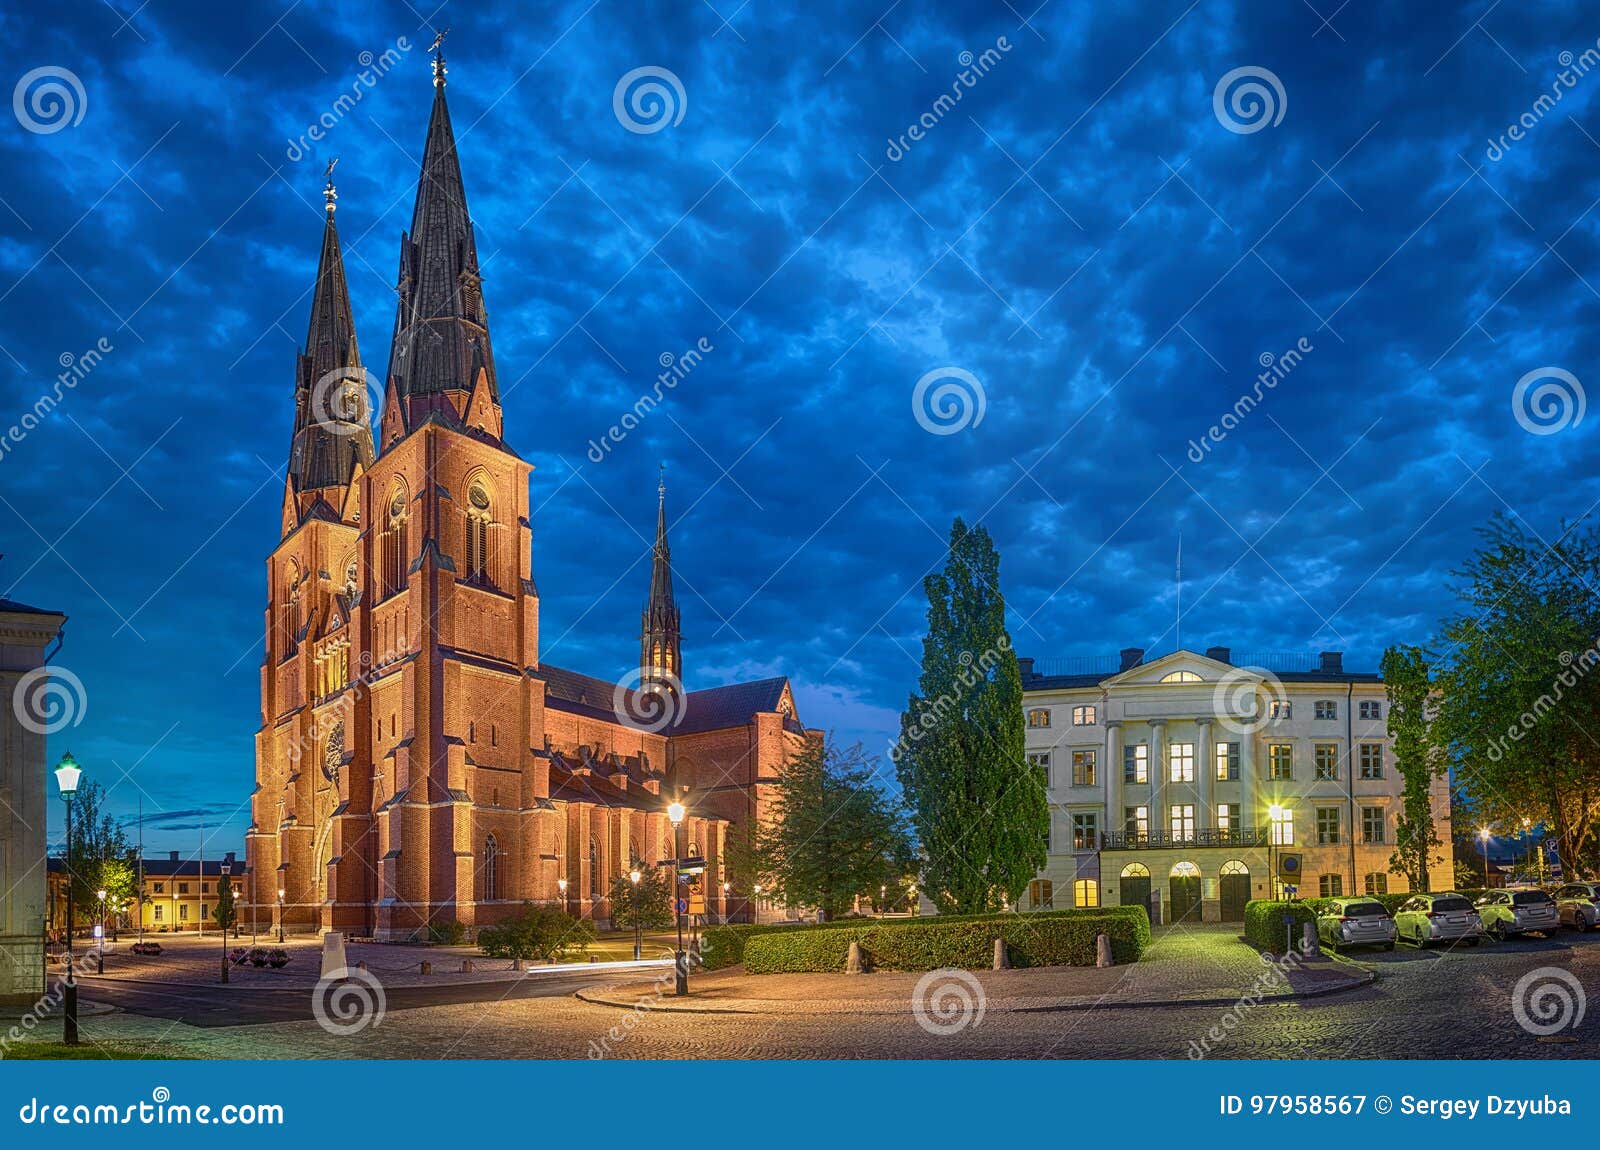 Uppsala Cathedral Uppsala Domkyrka A Cathedral Located In The Centre Of ...